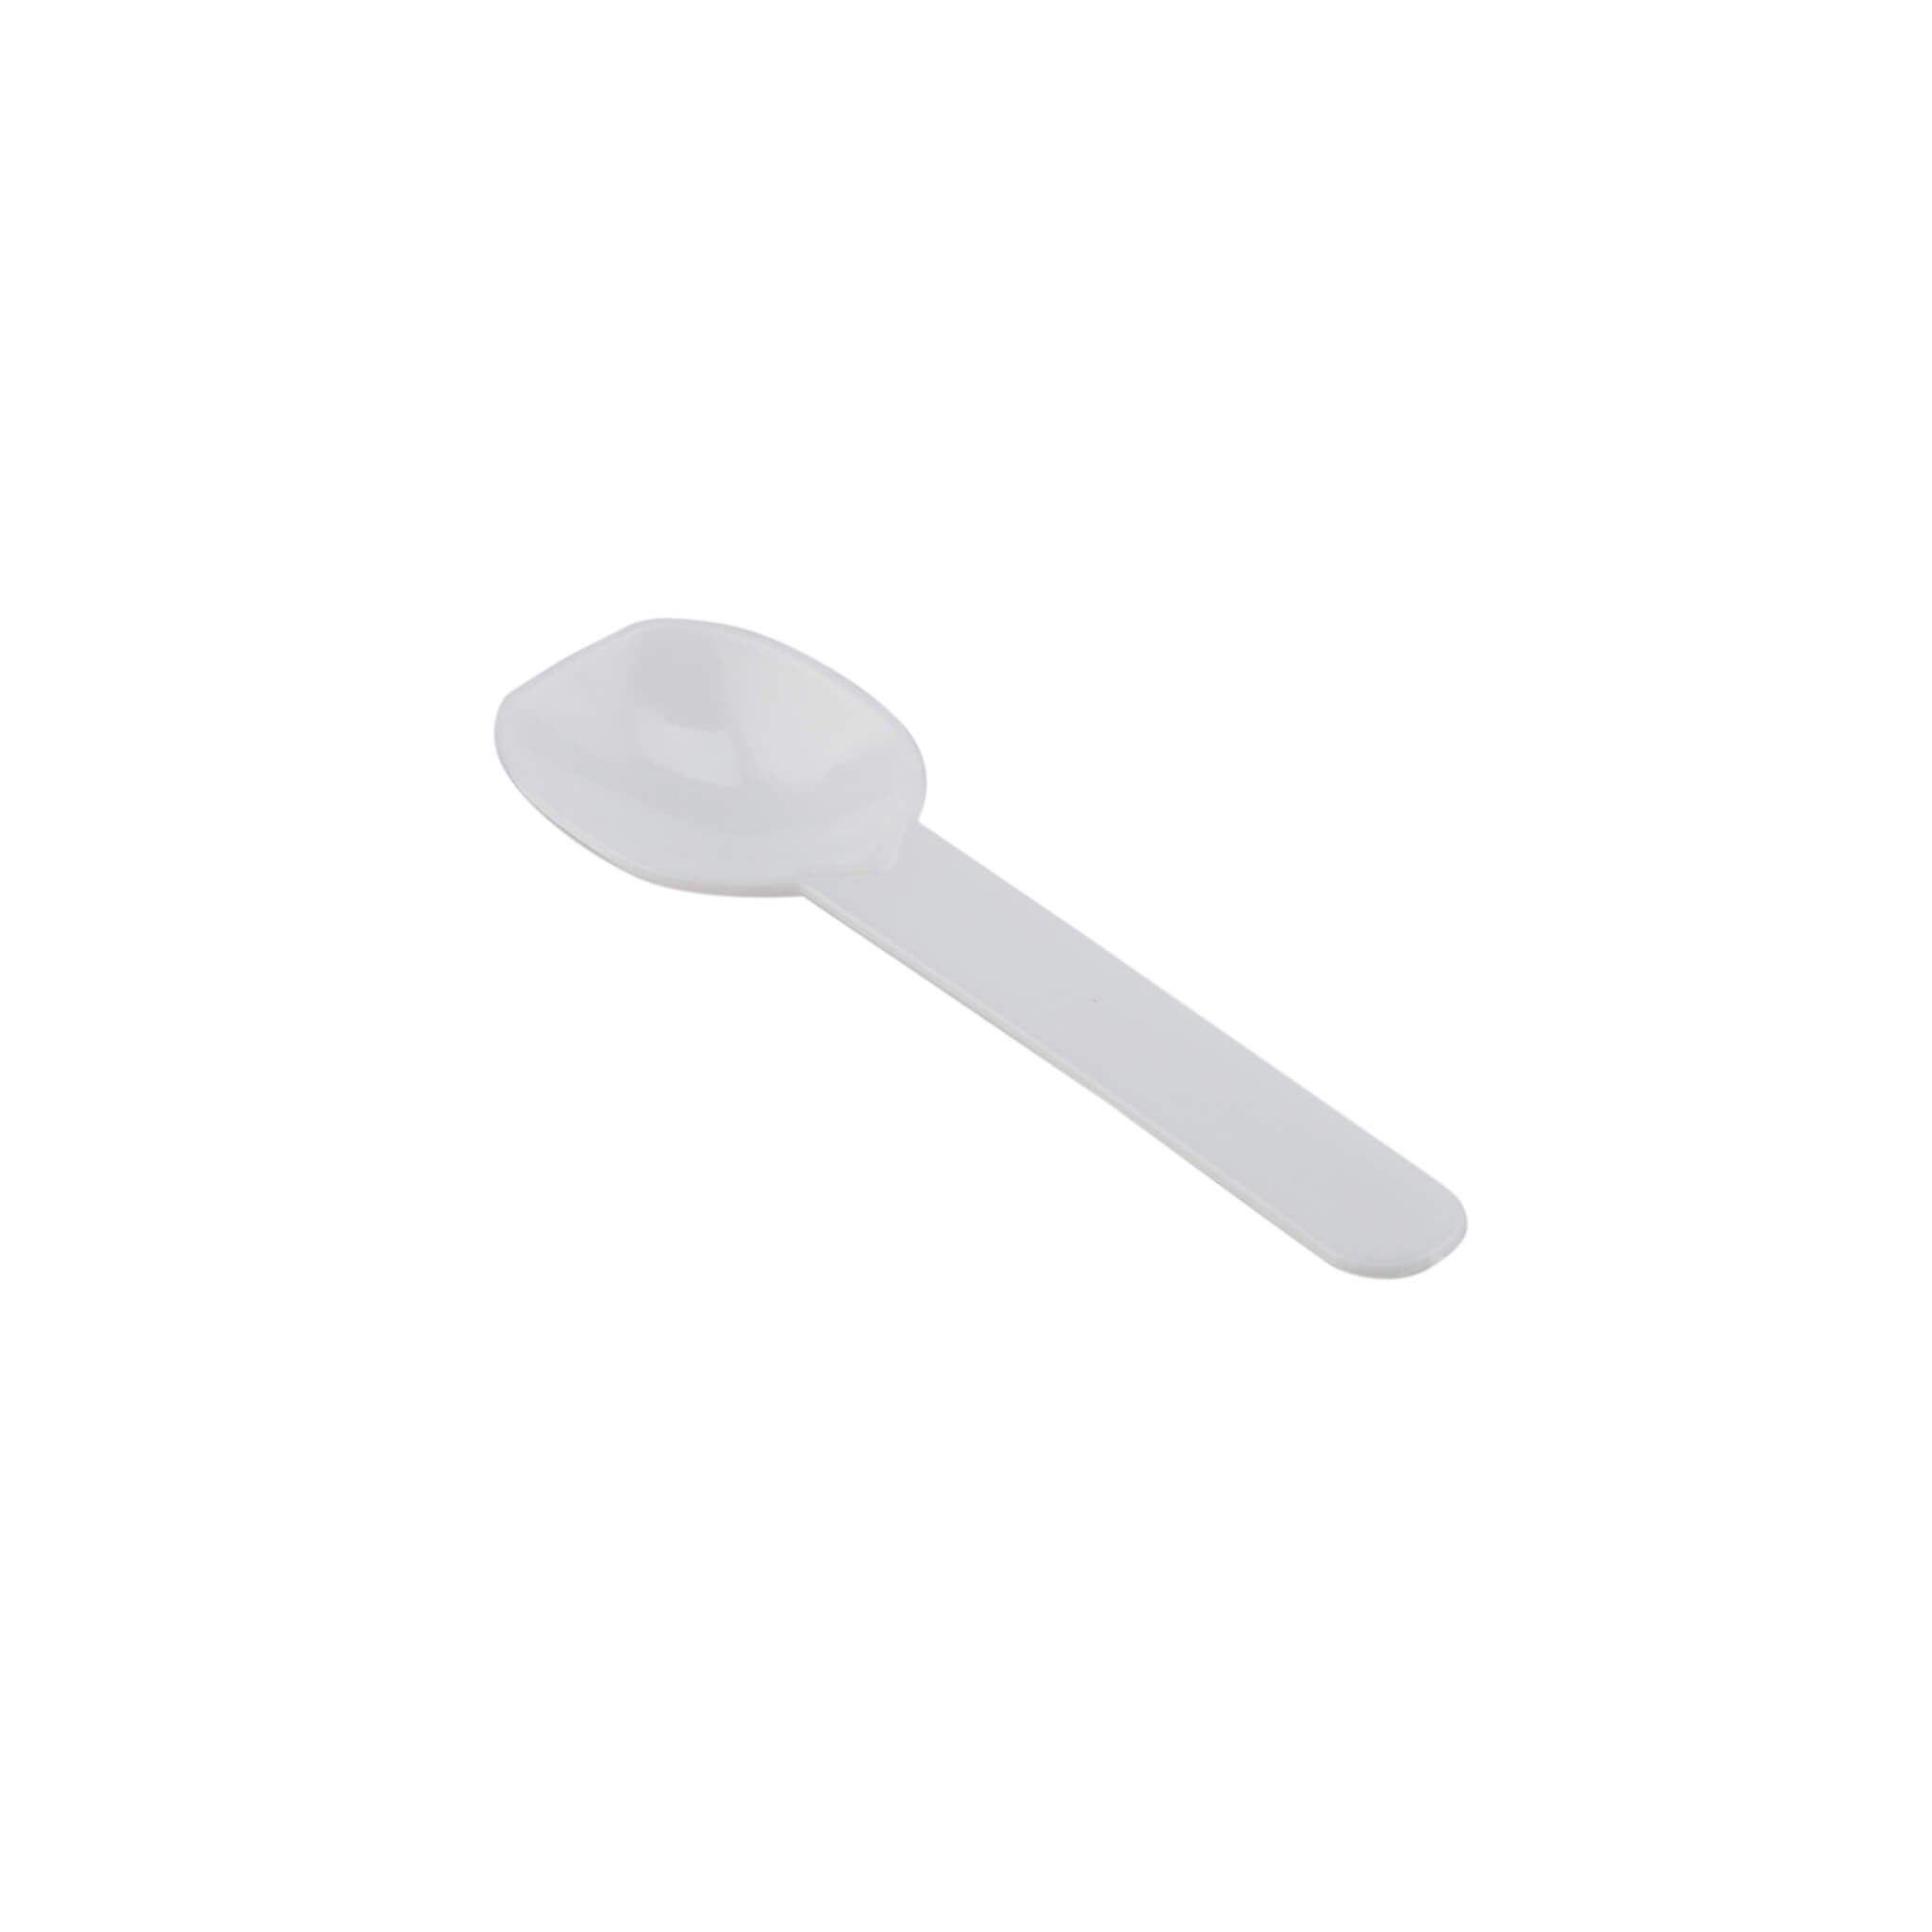 Plastic Taster Spoon Small White 3000 Pieces - Hotpack Global